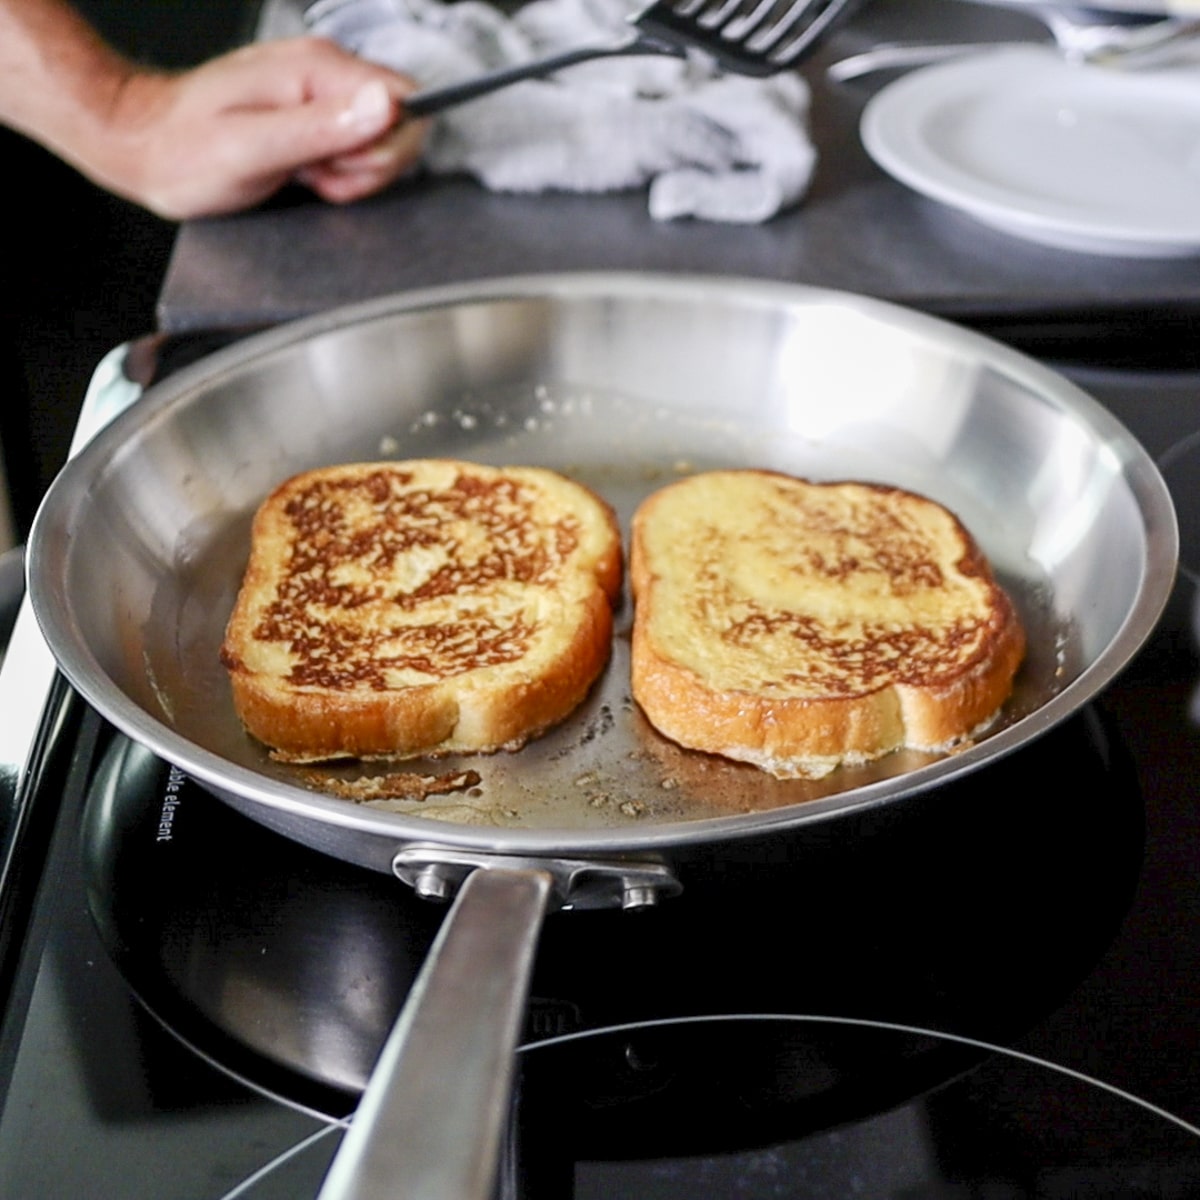 cooking the French toast for one.